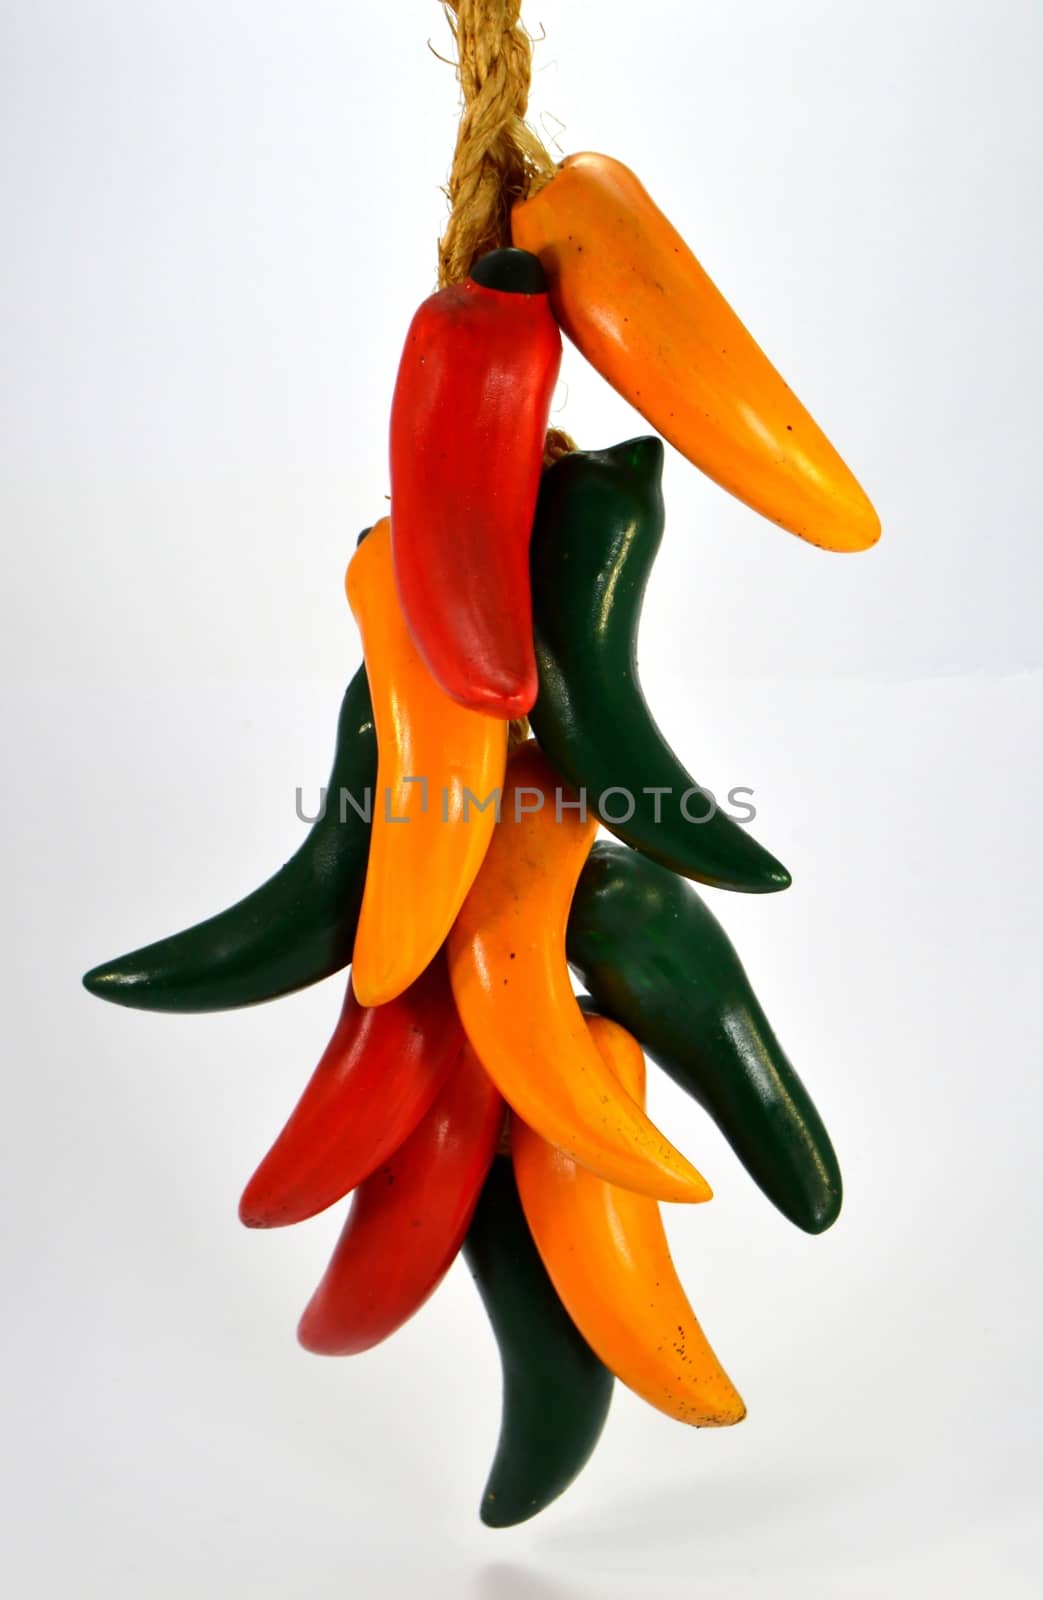 Assortment of red, green and yellow peppers on a rope in white background